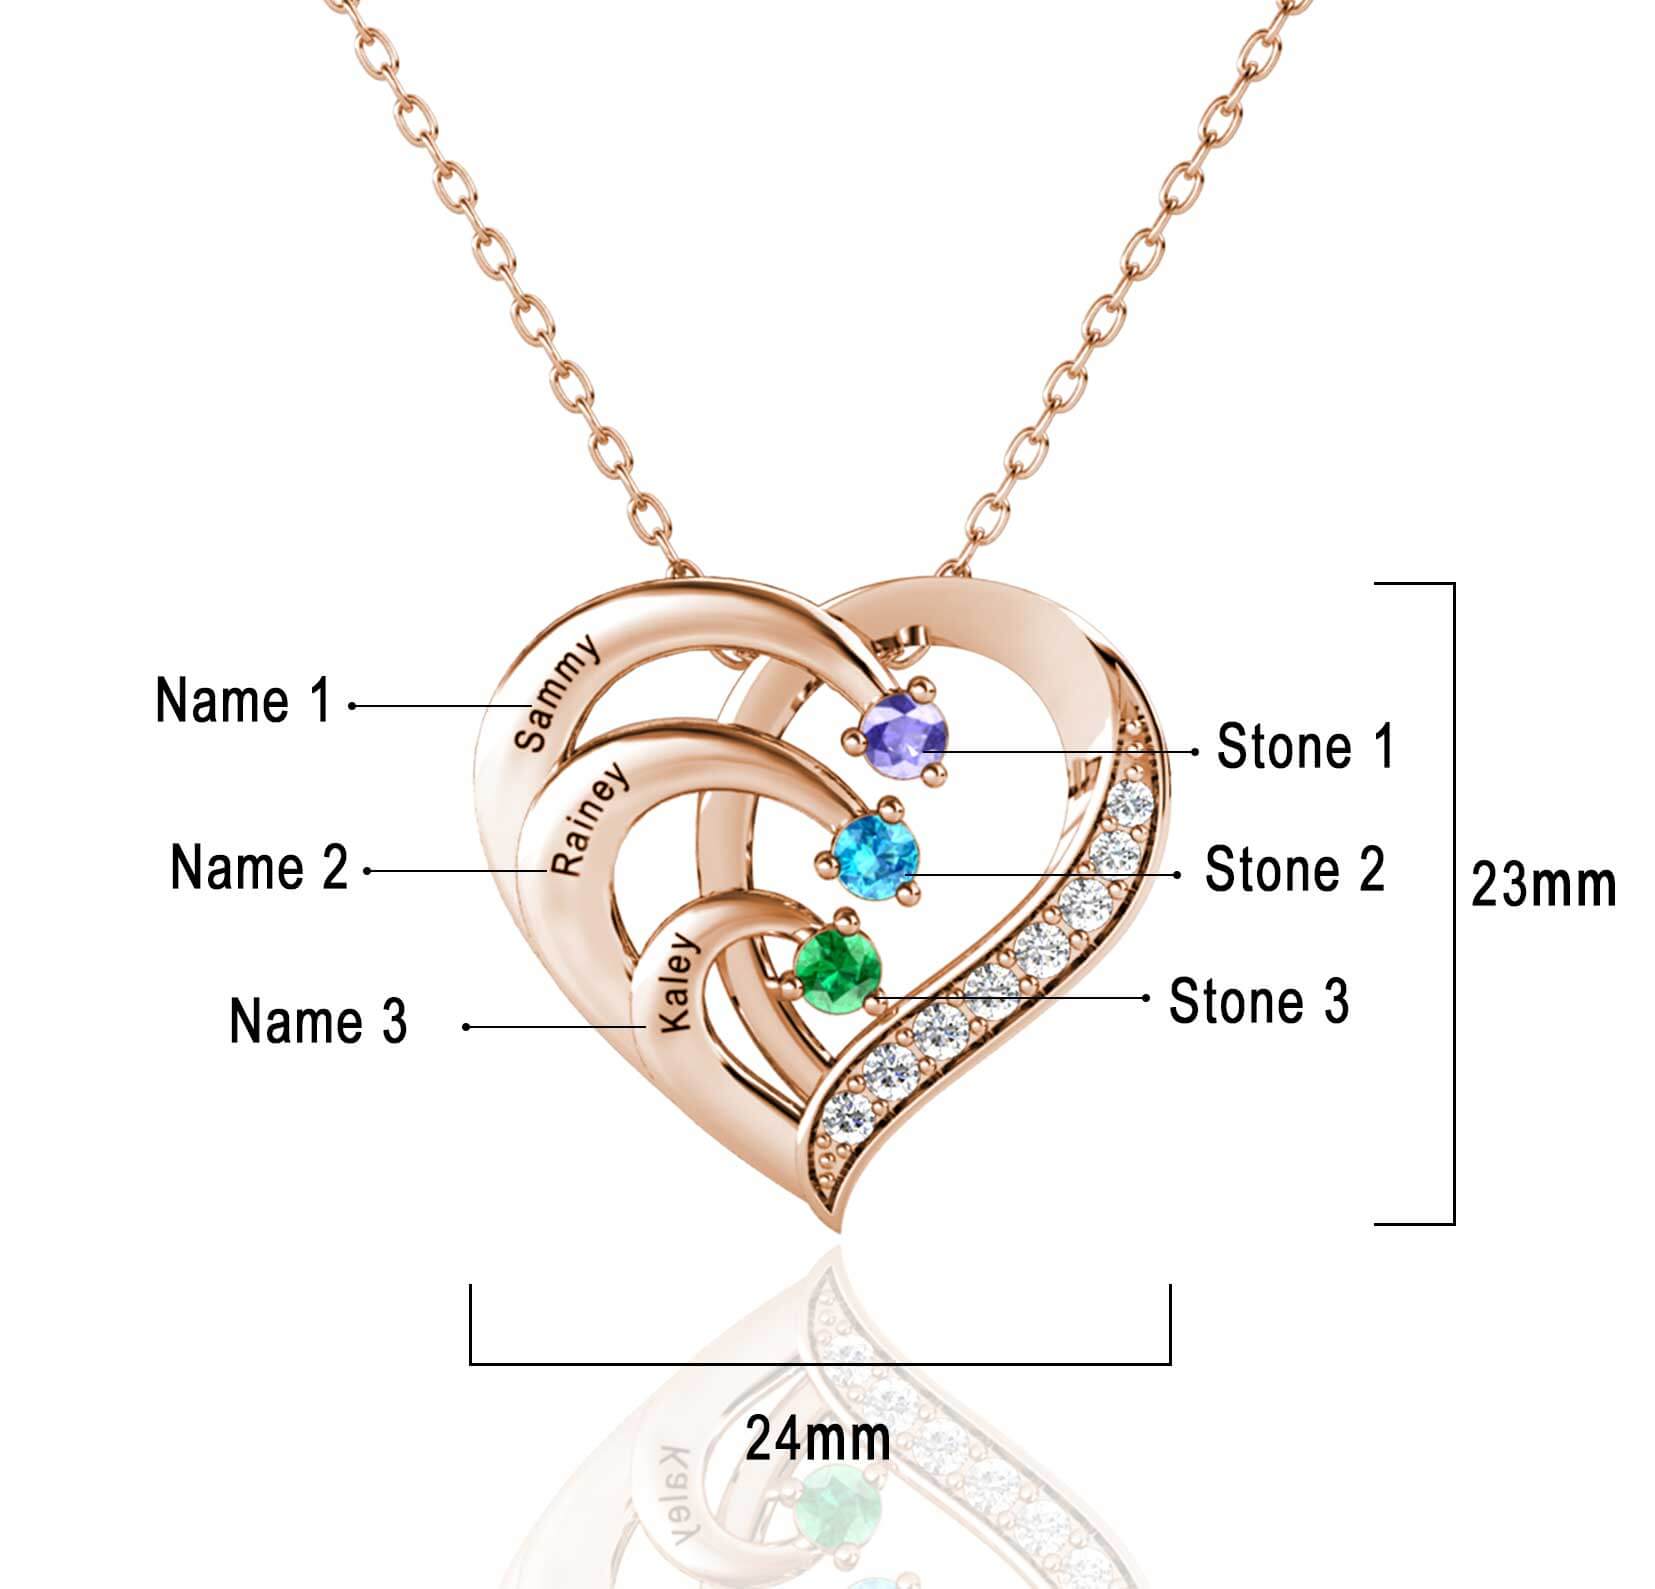 Personalised Heart Family 3 Birthstone Necklace with Children's Names